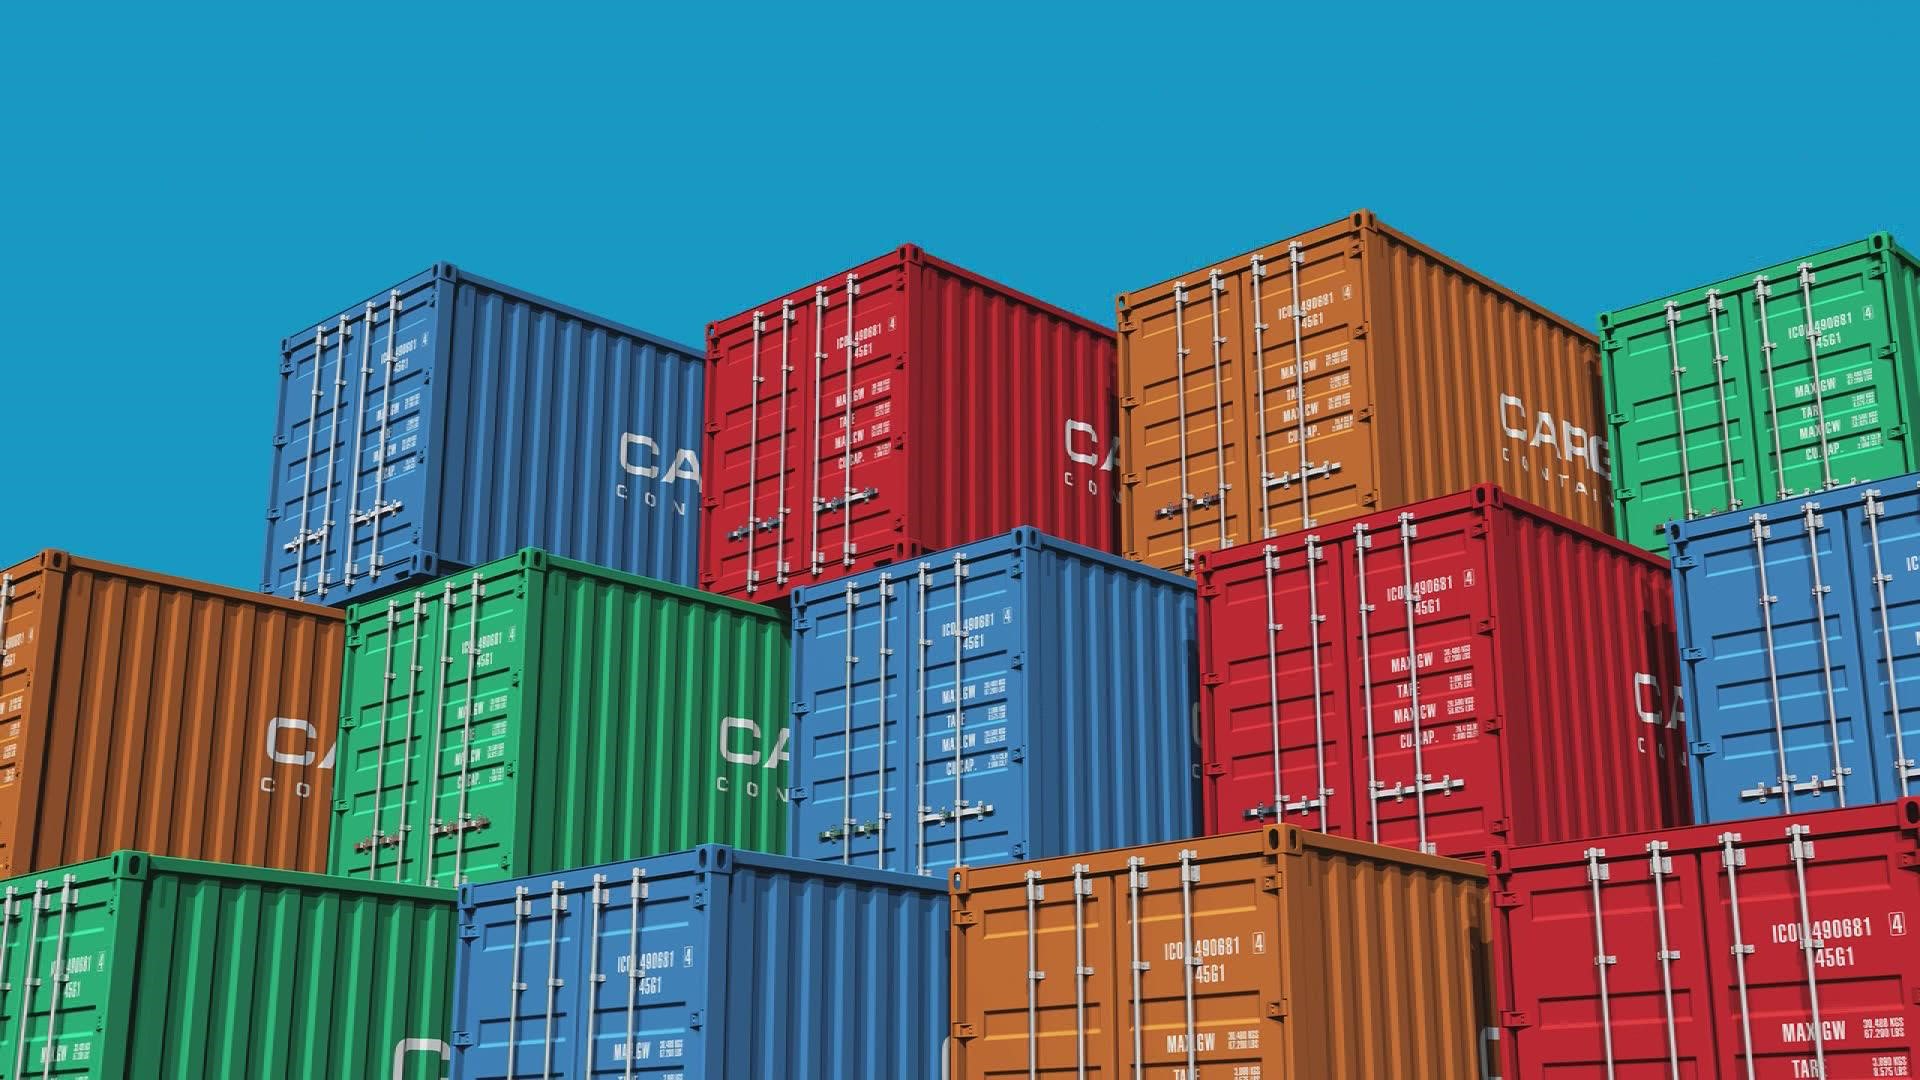 Goods from overseas are sitting on around 500,000 shipping containers stuck in a traffic jam at the ports of Los Angeles and Long Beach.